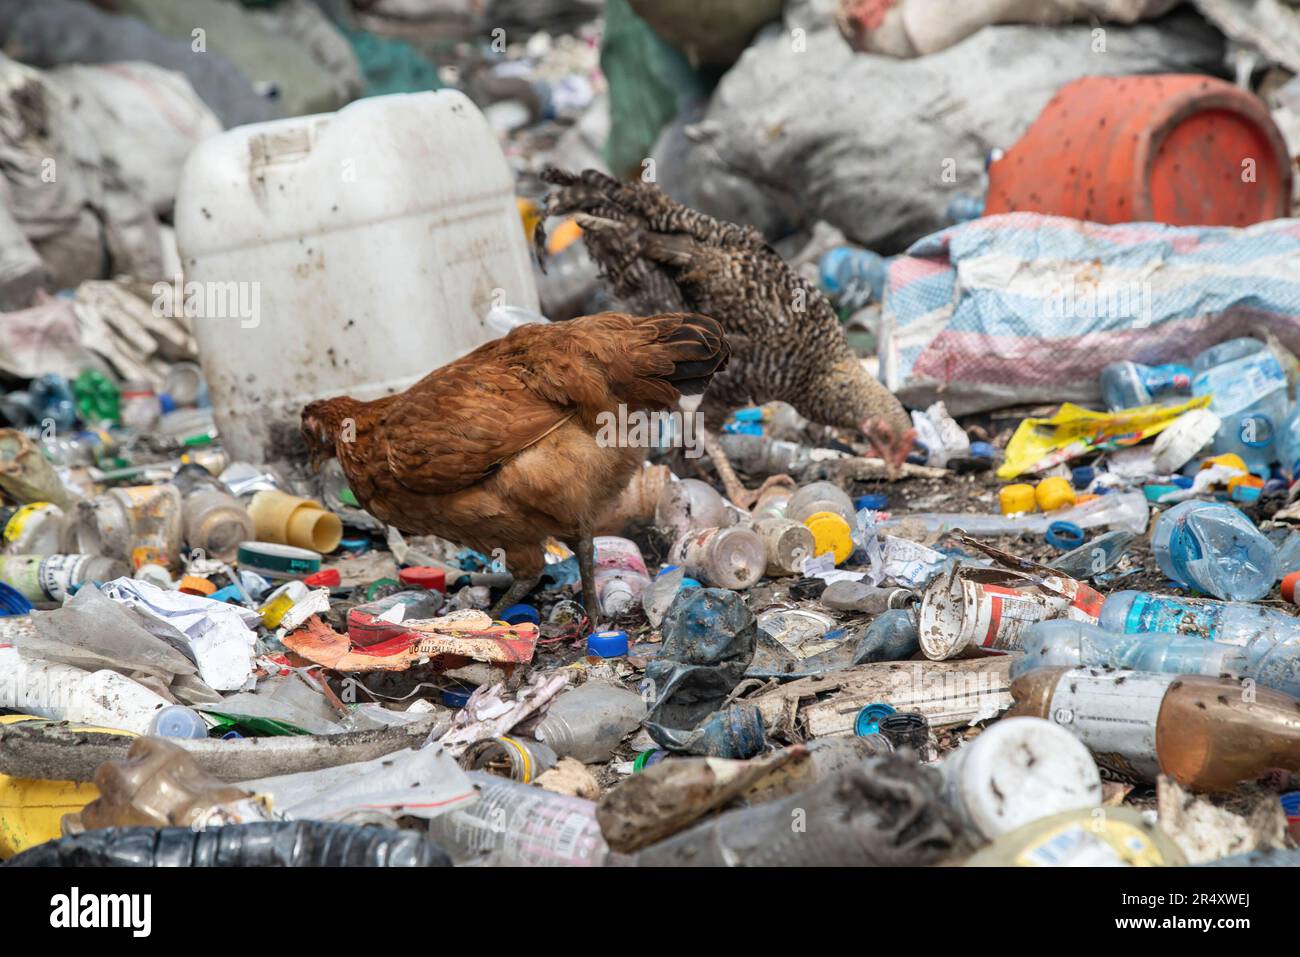 Chicken seen feeding at a plastic recycling plant in Nakuru. Negotiators have gathered in Paris, France for the second round of deliberations to develop a global treaty aimed at tackling the escalating issue of plastic pollution. According to a recent report by the United Nations Environment Programme (UNEP), countries have the potential to reduce plastic pollution by 80% by 2040 by eliminating unnecessary plastics, implementing recycling and reuse strategies, introducing deposit return schemes, and substituting plastic with sustainable alternative materials. Stock Photo